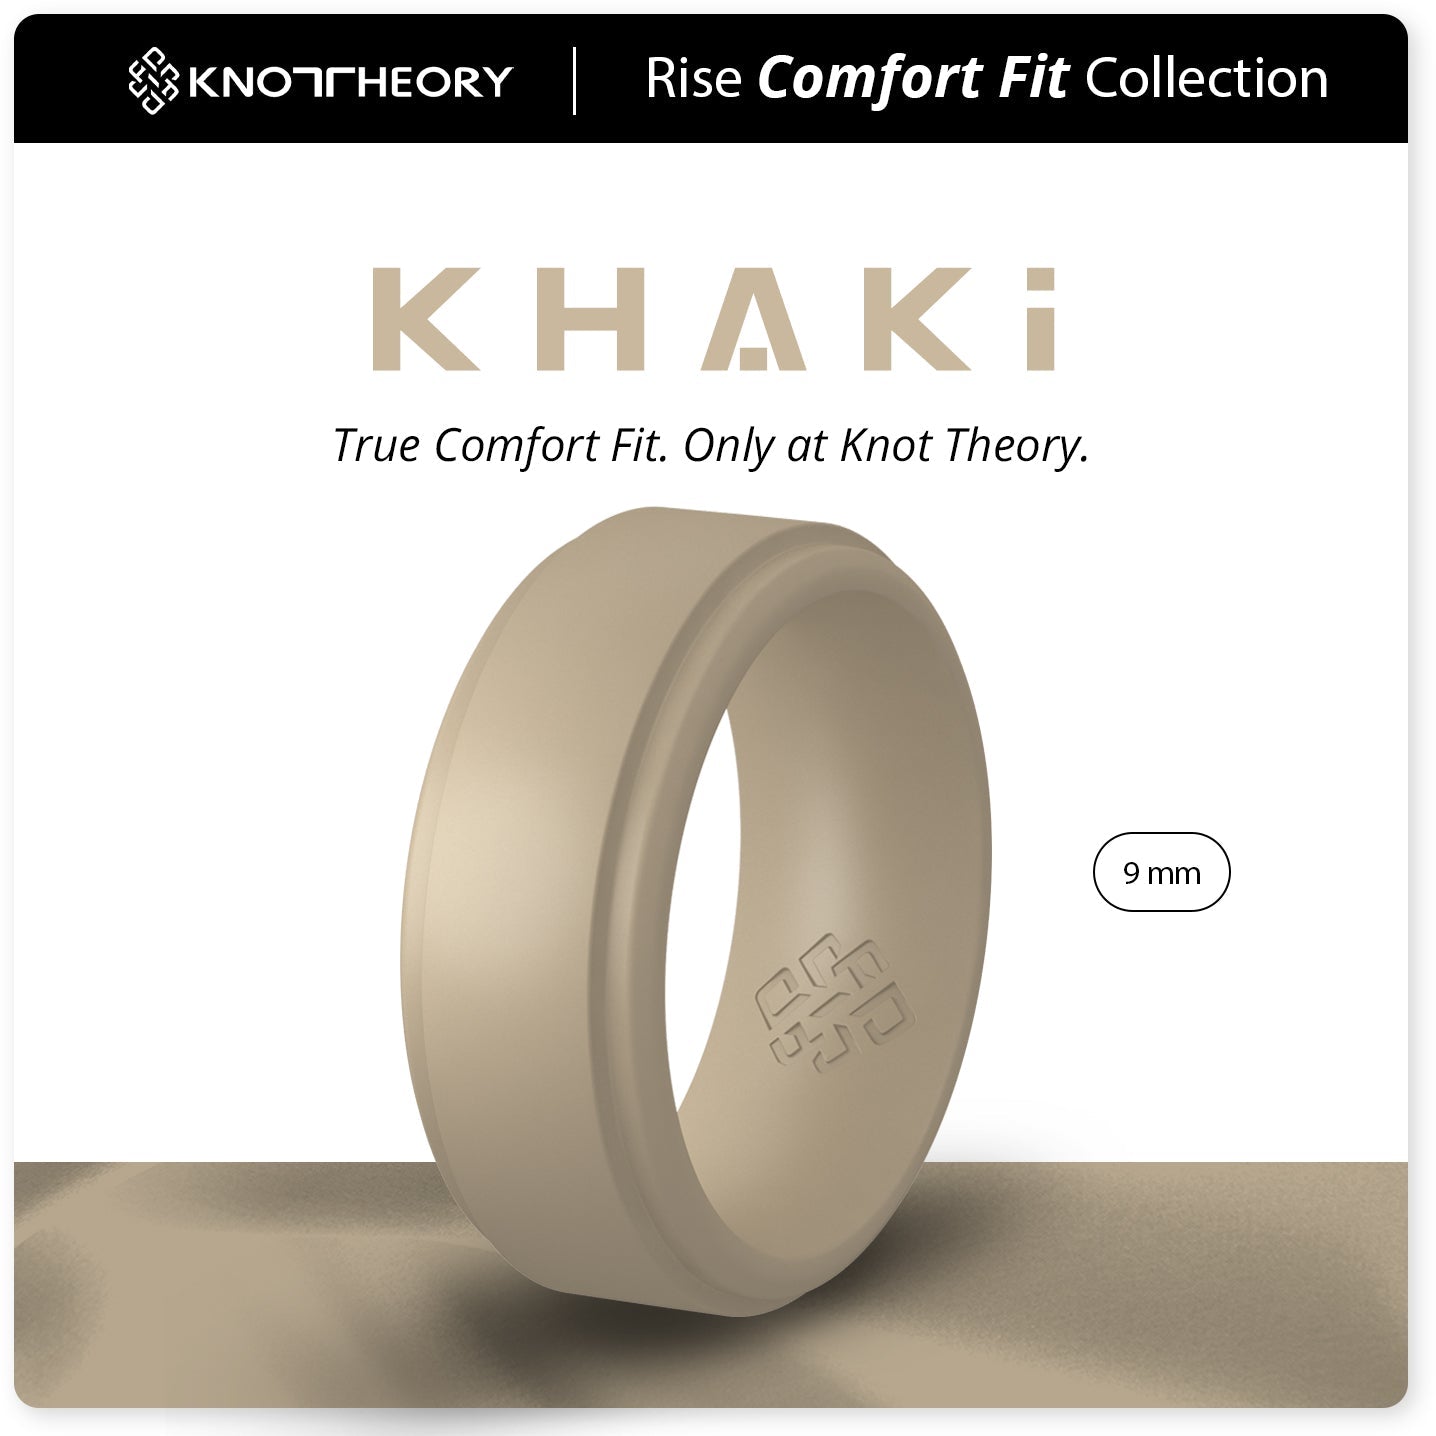 Khaki Light Brown Step Edge Breathable Silicone Ring for Men - Knot Theory